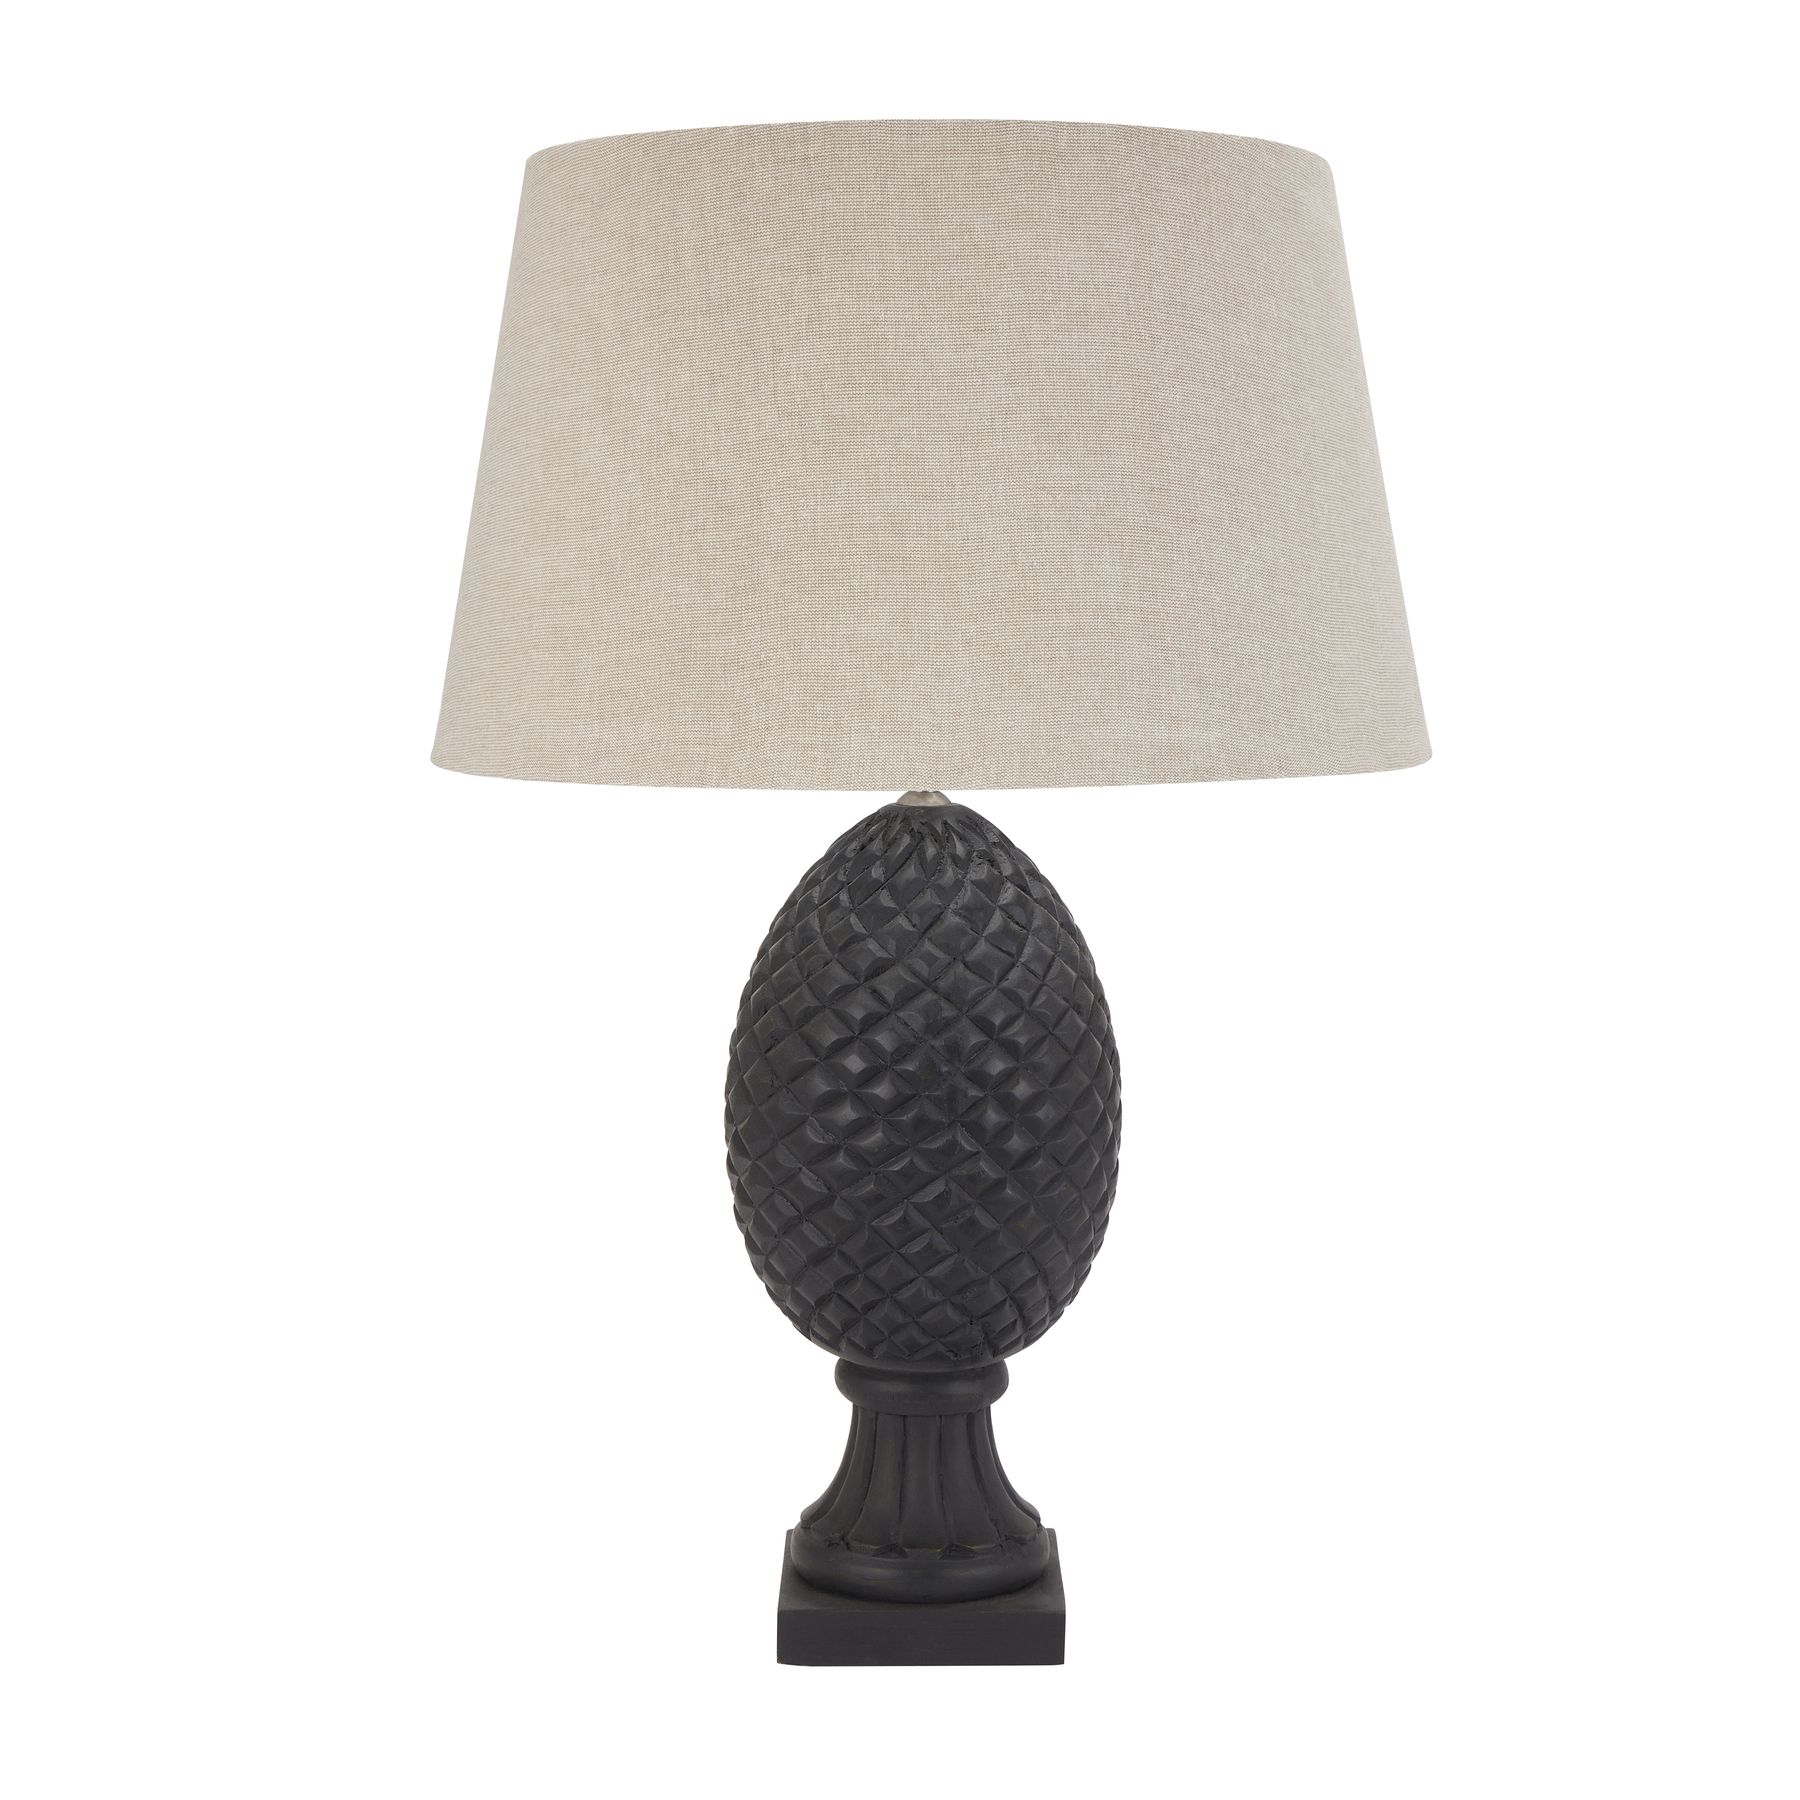 Delaney Grey Pineapple  Lamp With Linen Shade - Image 1